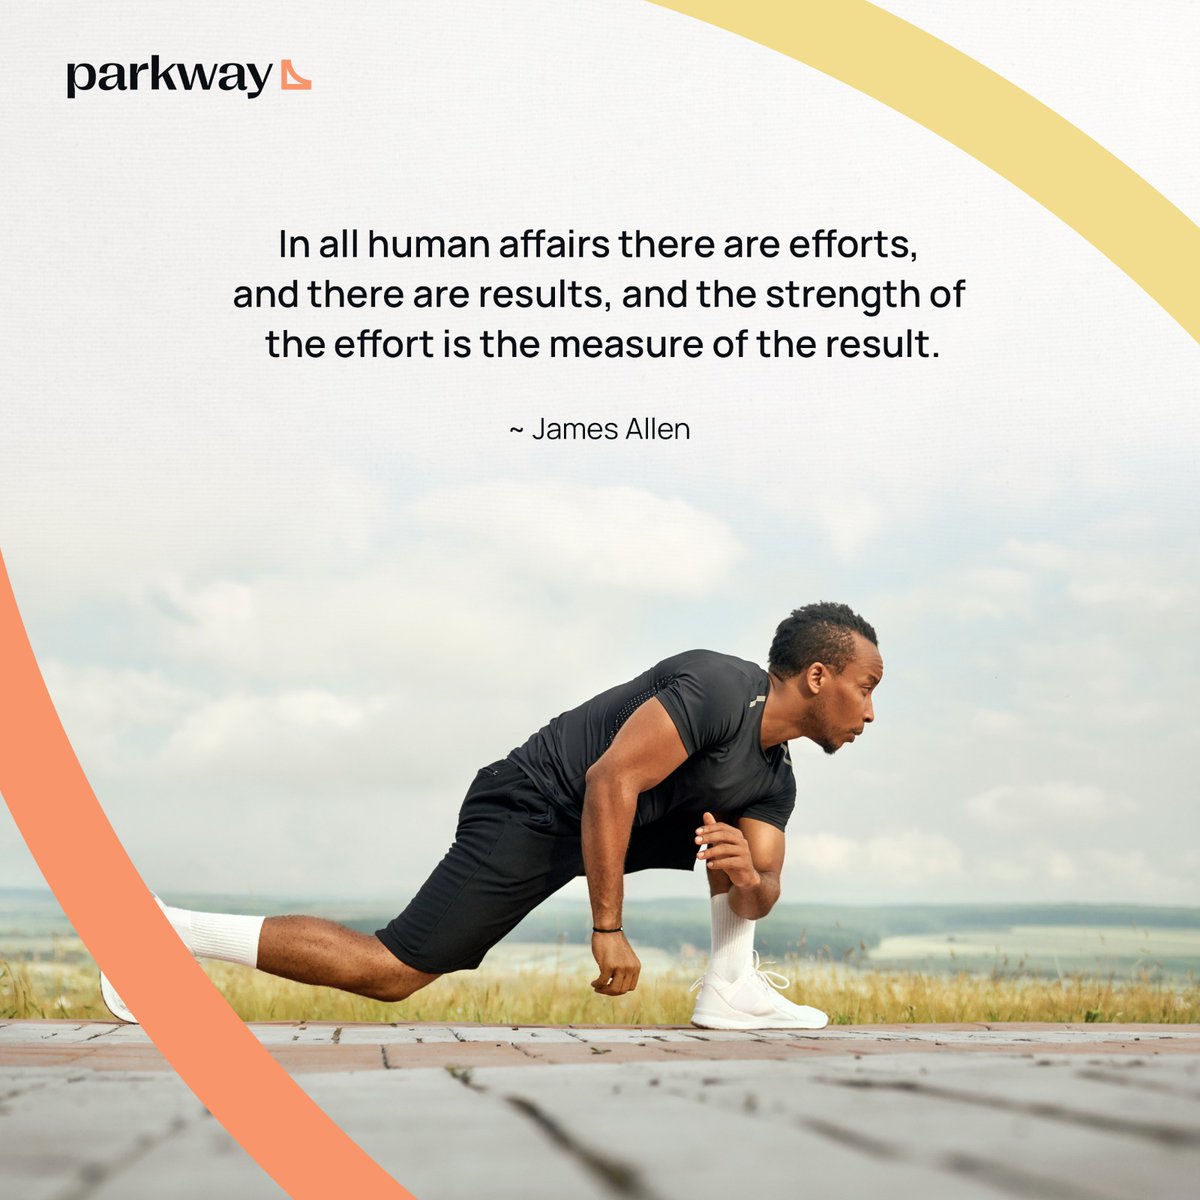 Success isn't just about having talent, it's about putting in the effort.
#Goals #motivationmonday

#parkway #parkwayahead #fintechinfrastructureprovider #fintechinnovations #fintechinfrastructure #StayInspired #keeppushing